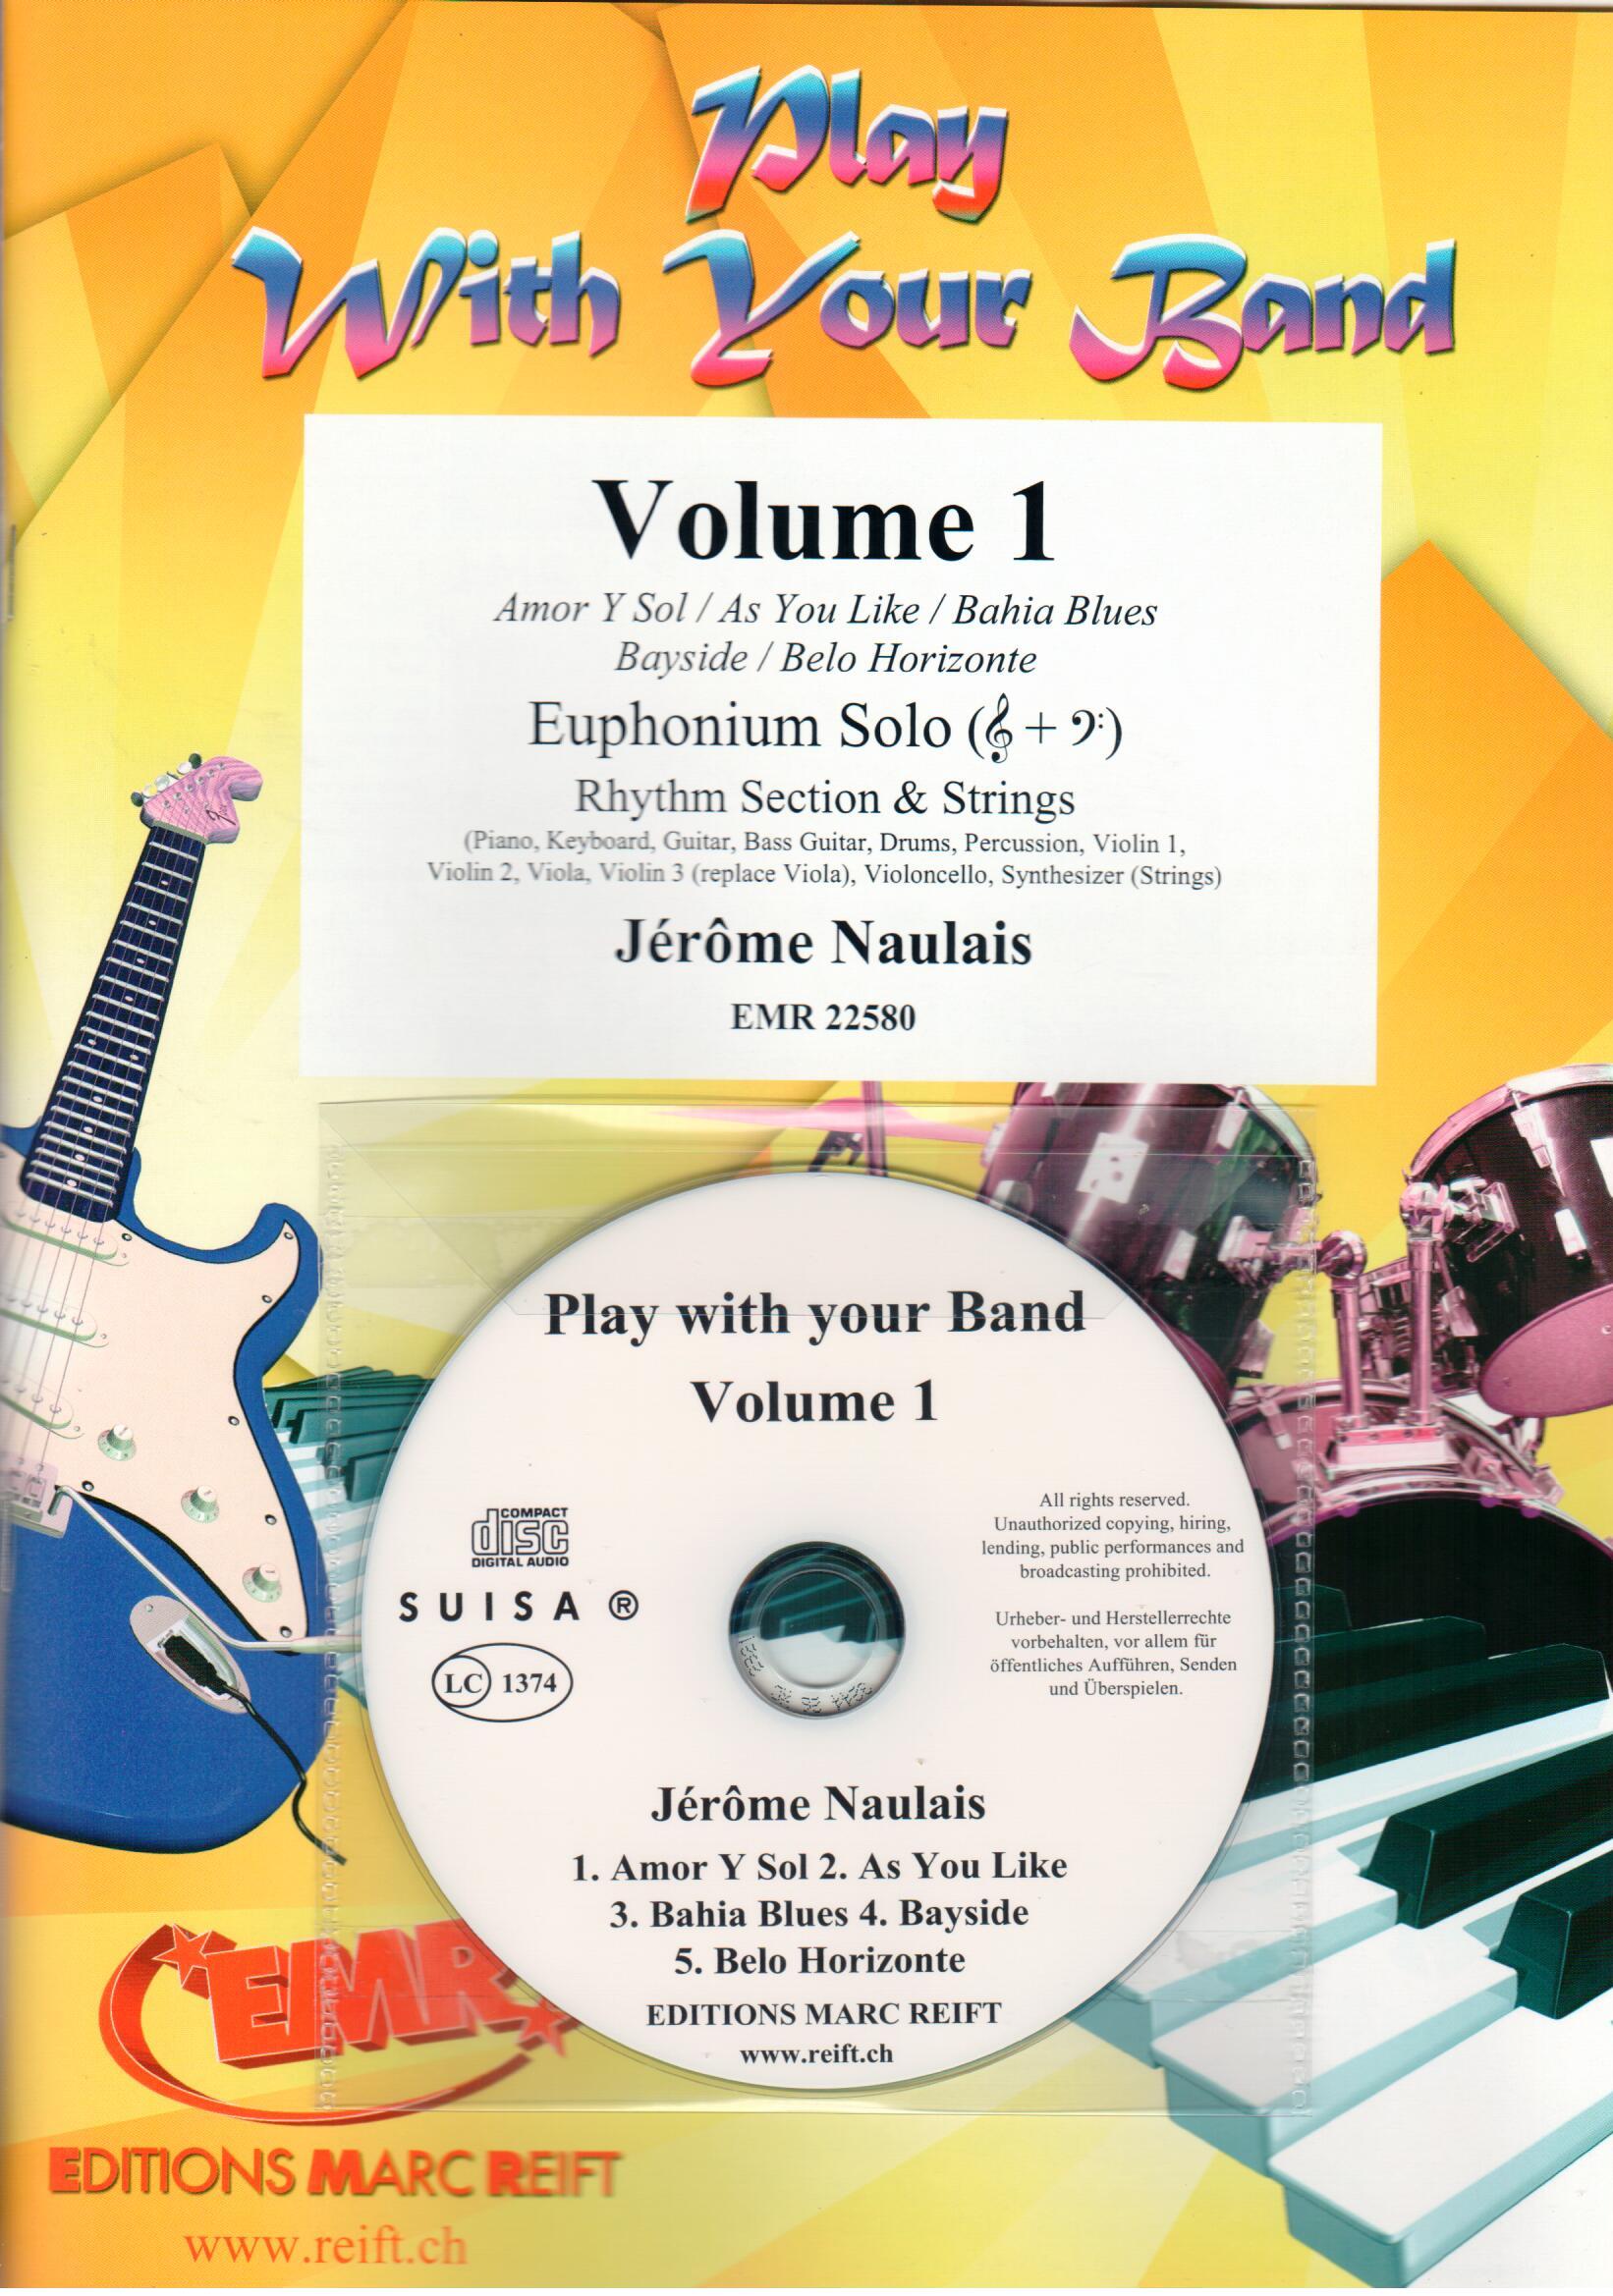 PLAY WITH YOUR BAND VOLUME 1, SOLOS - Euphonium